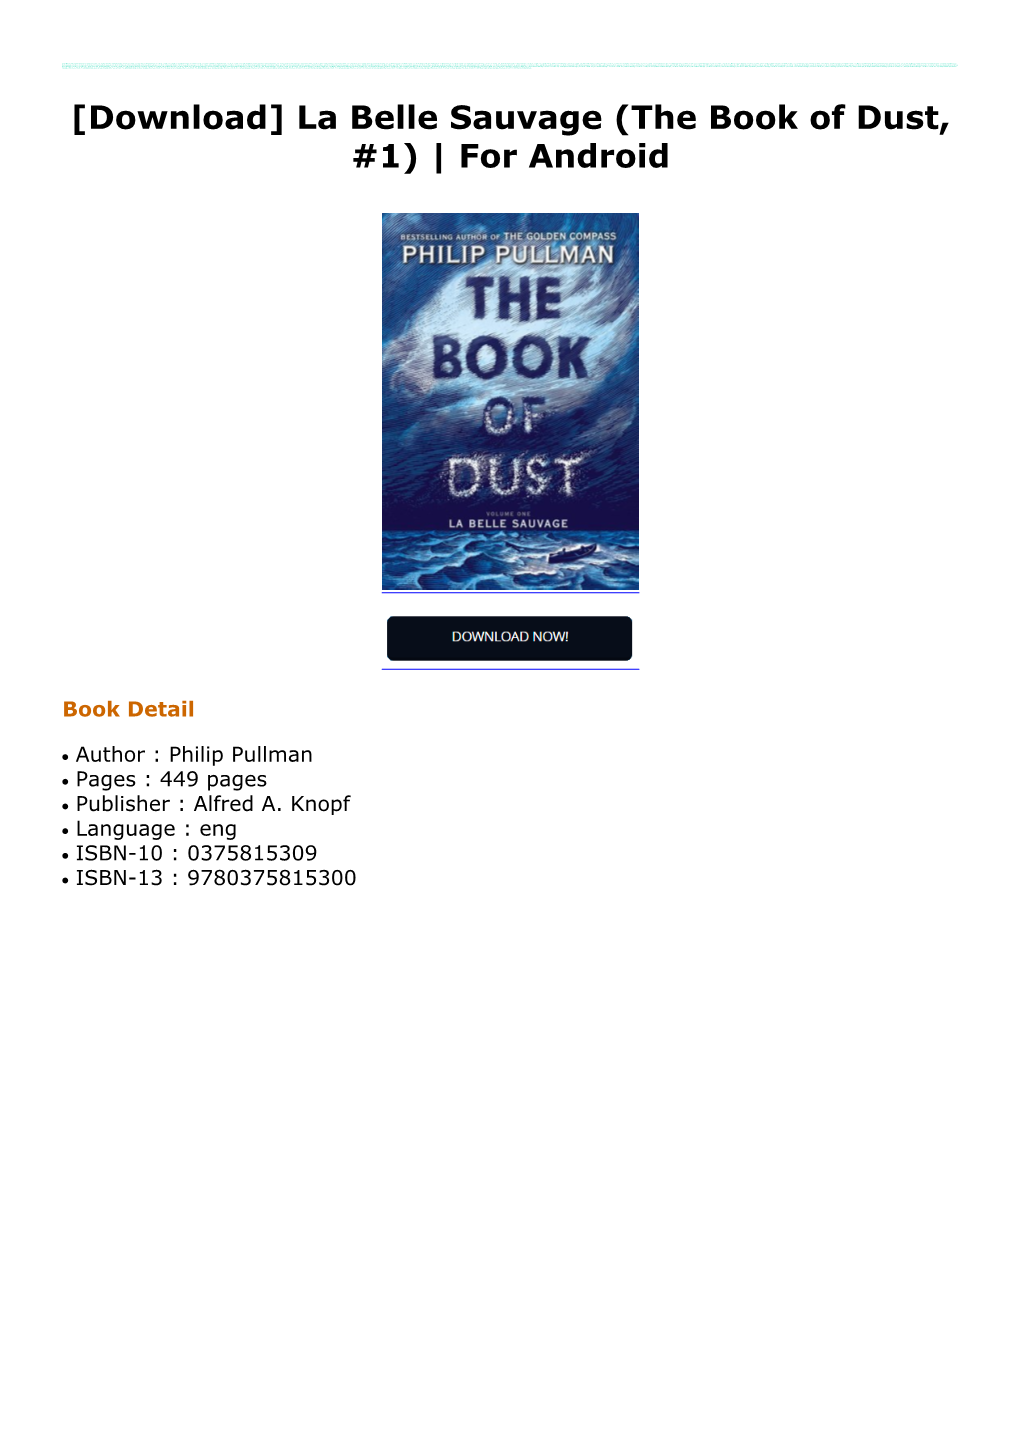 La Belle Sauvage (The Book of Dust, #1) | for Android